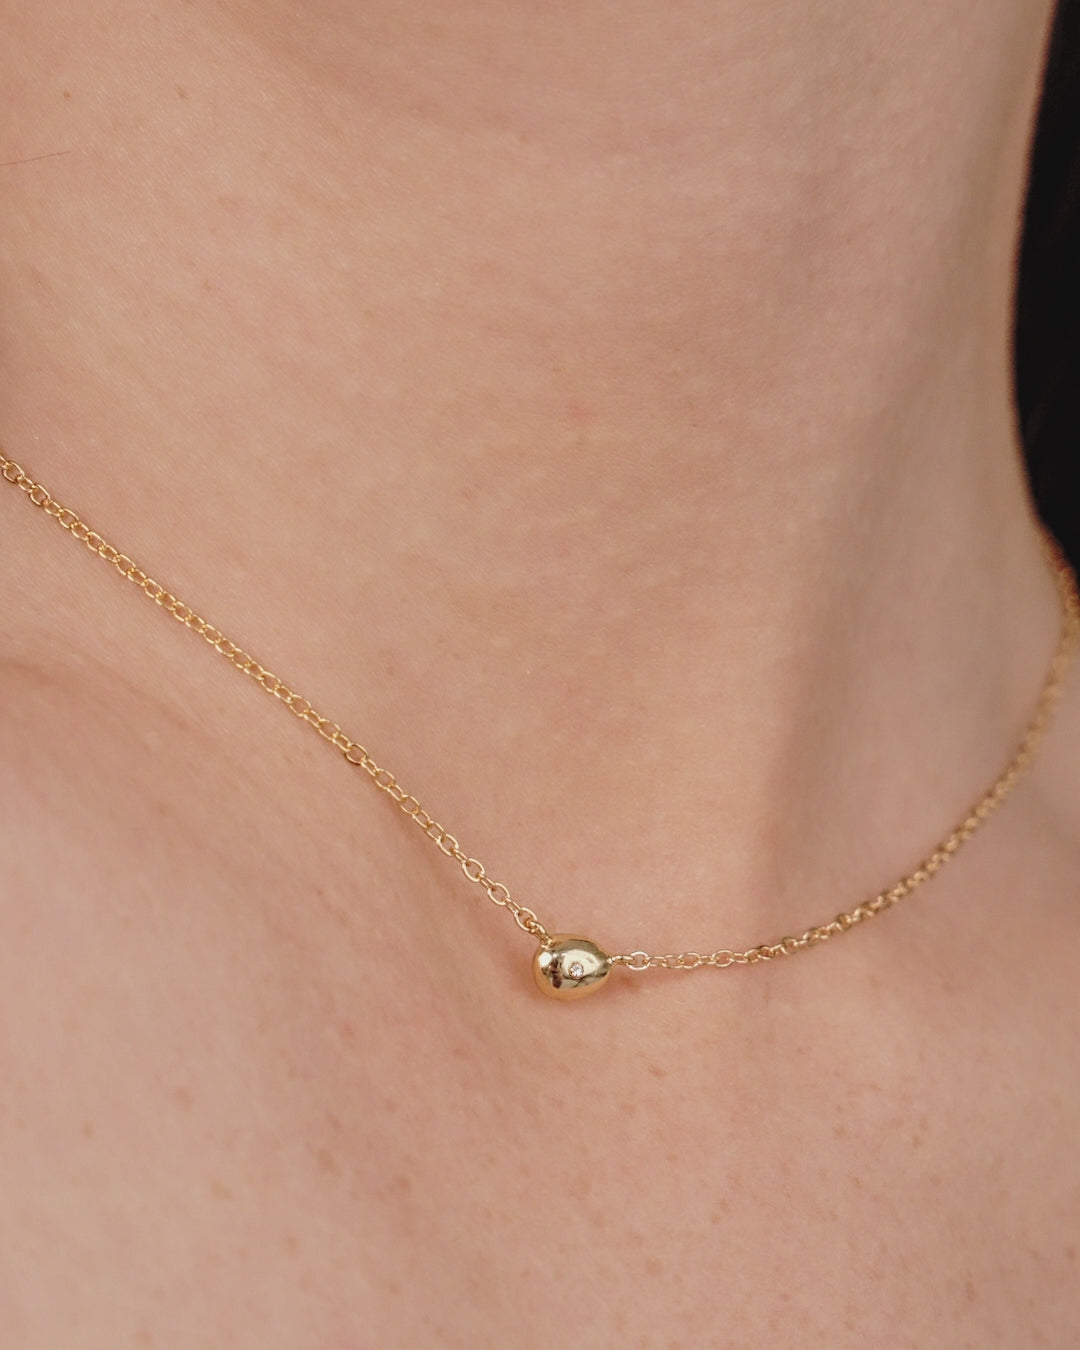 Polished Dainty Pebble Pendant Necklace on model in video